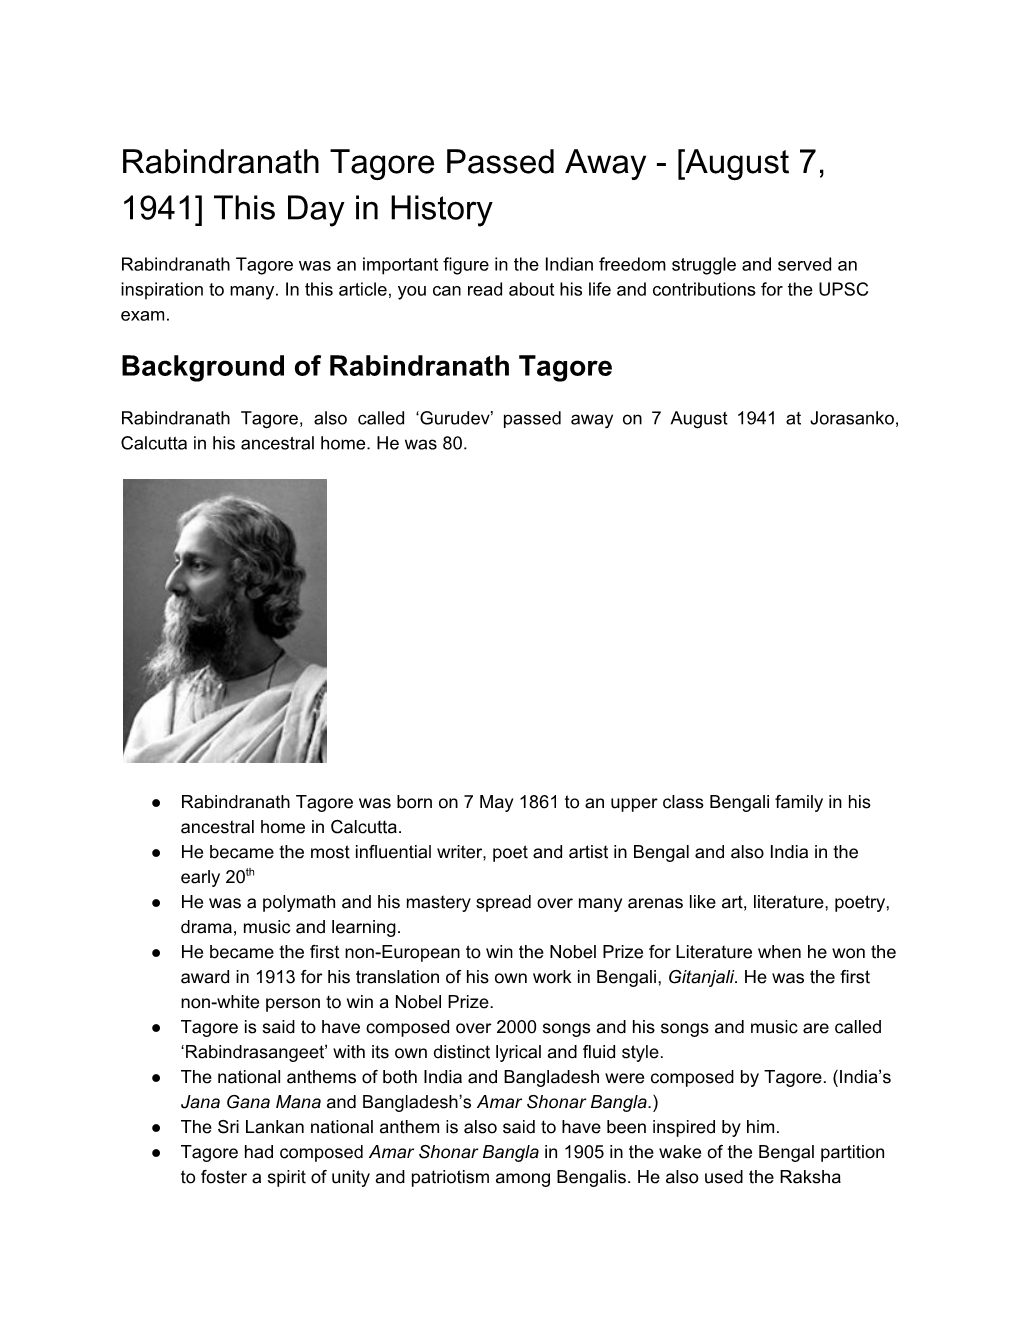 Rabindranath Tagore Passed Away - [August 7, 1941] This Day in History